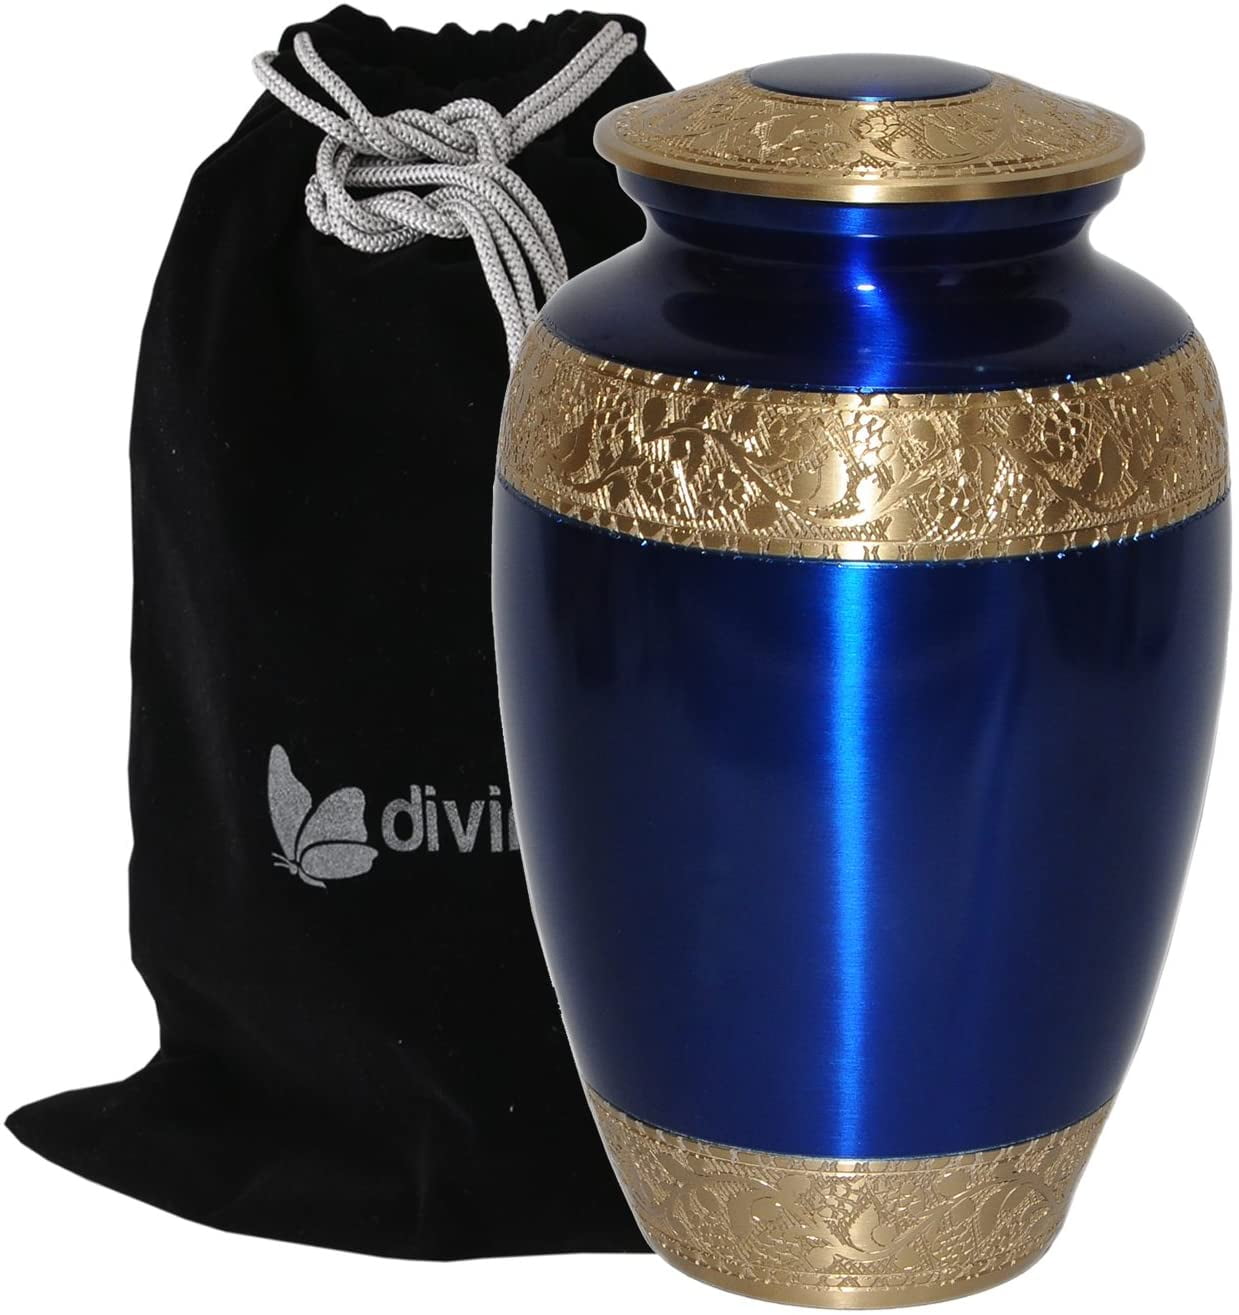 Well Lived® Blue Metallic Adult Cremation Urn for human ashes 